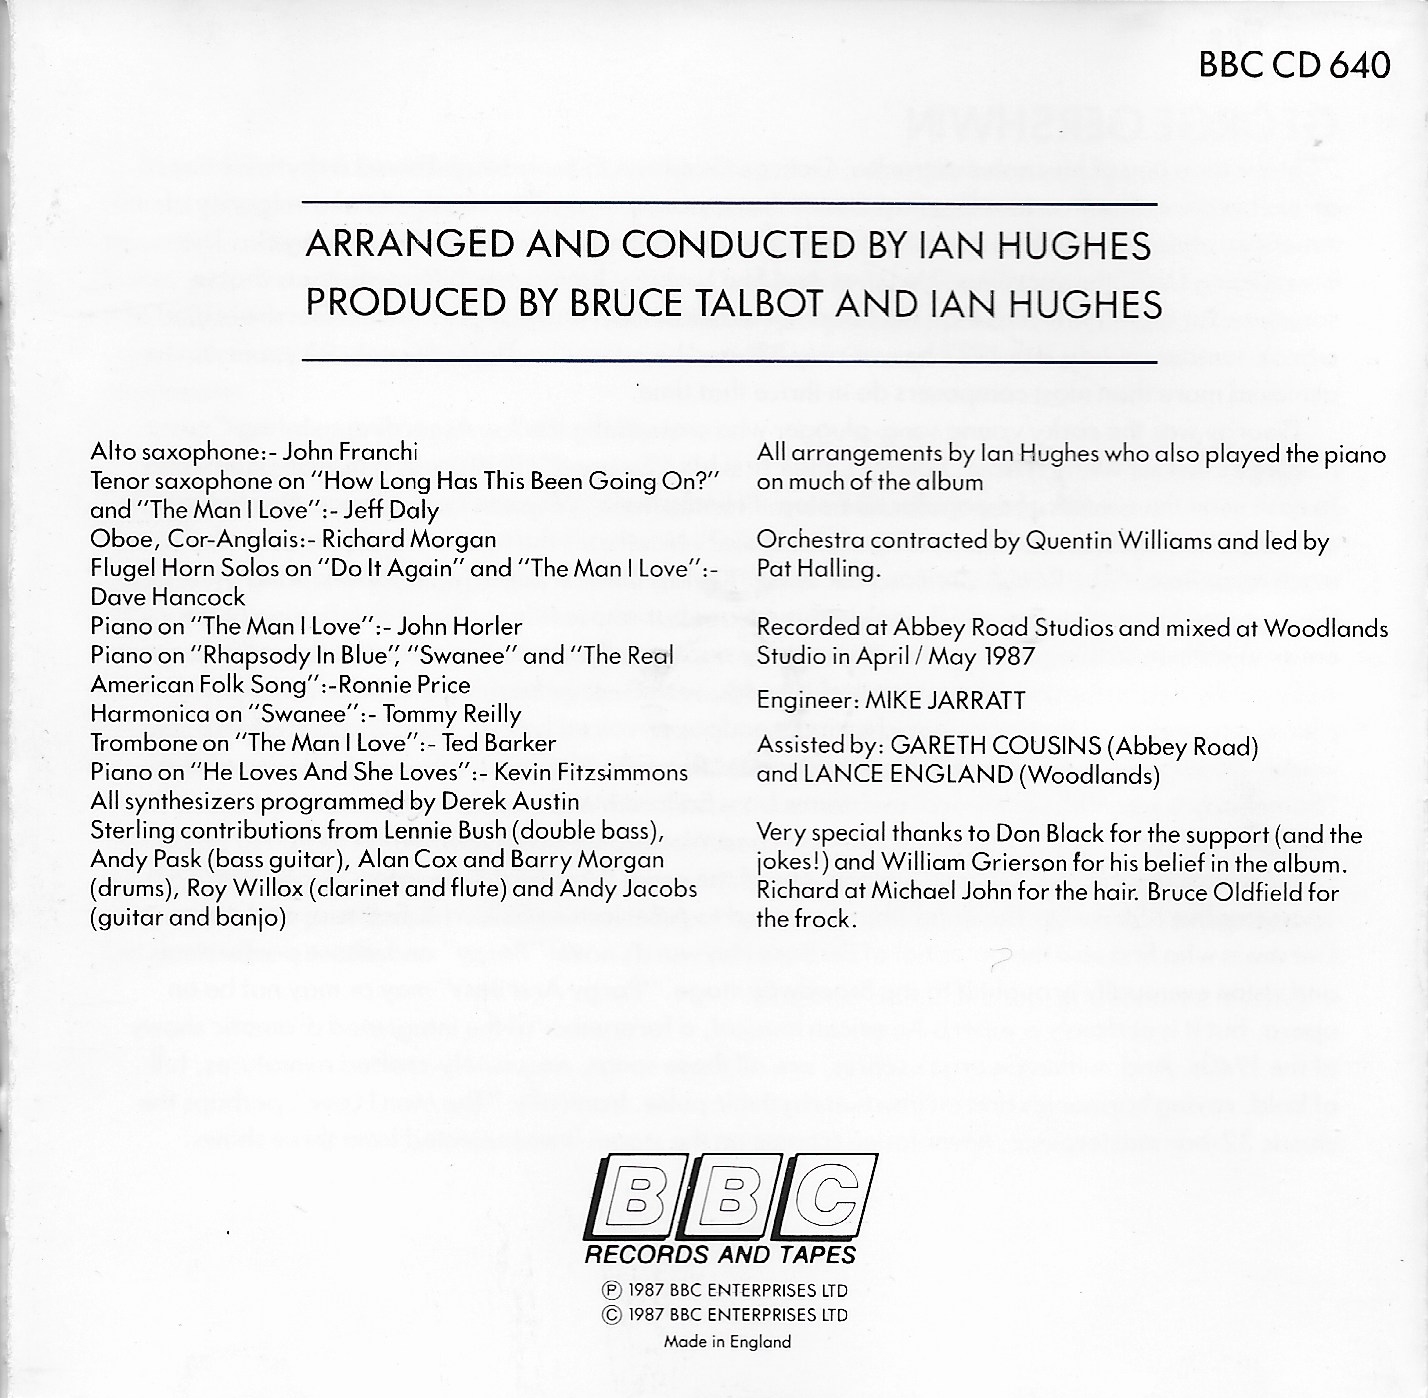 Middle of cover of BBCCD640